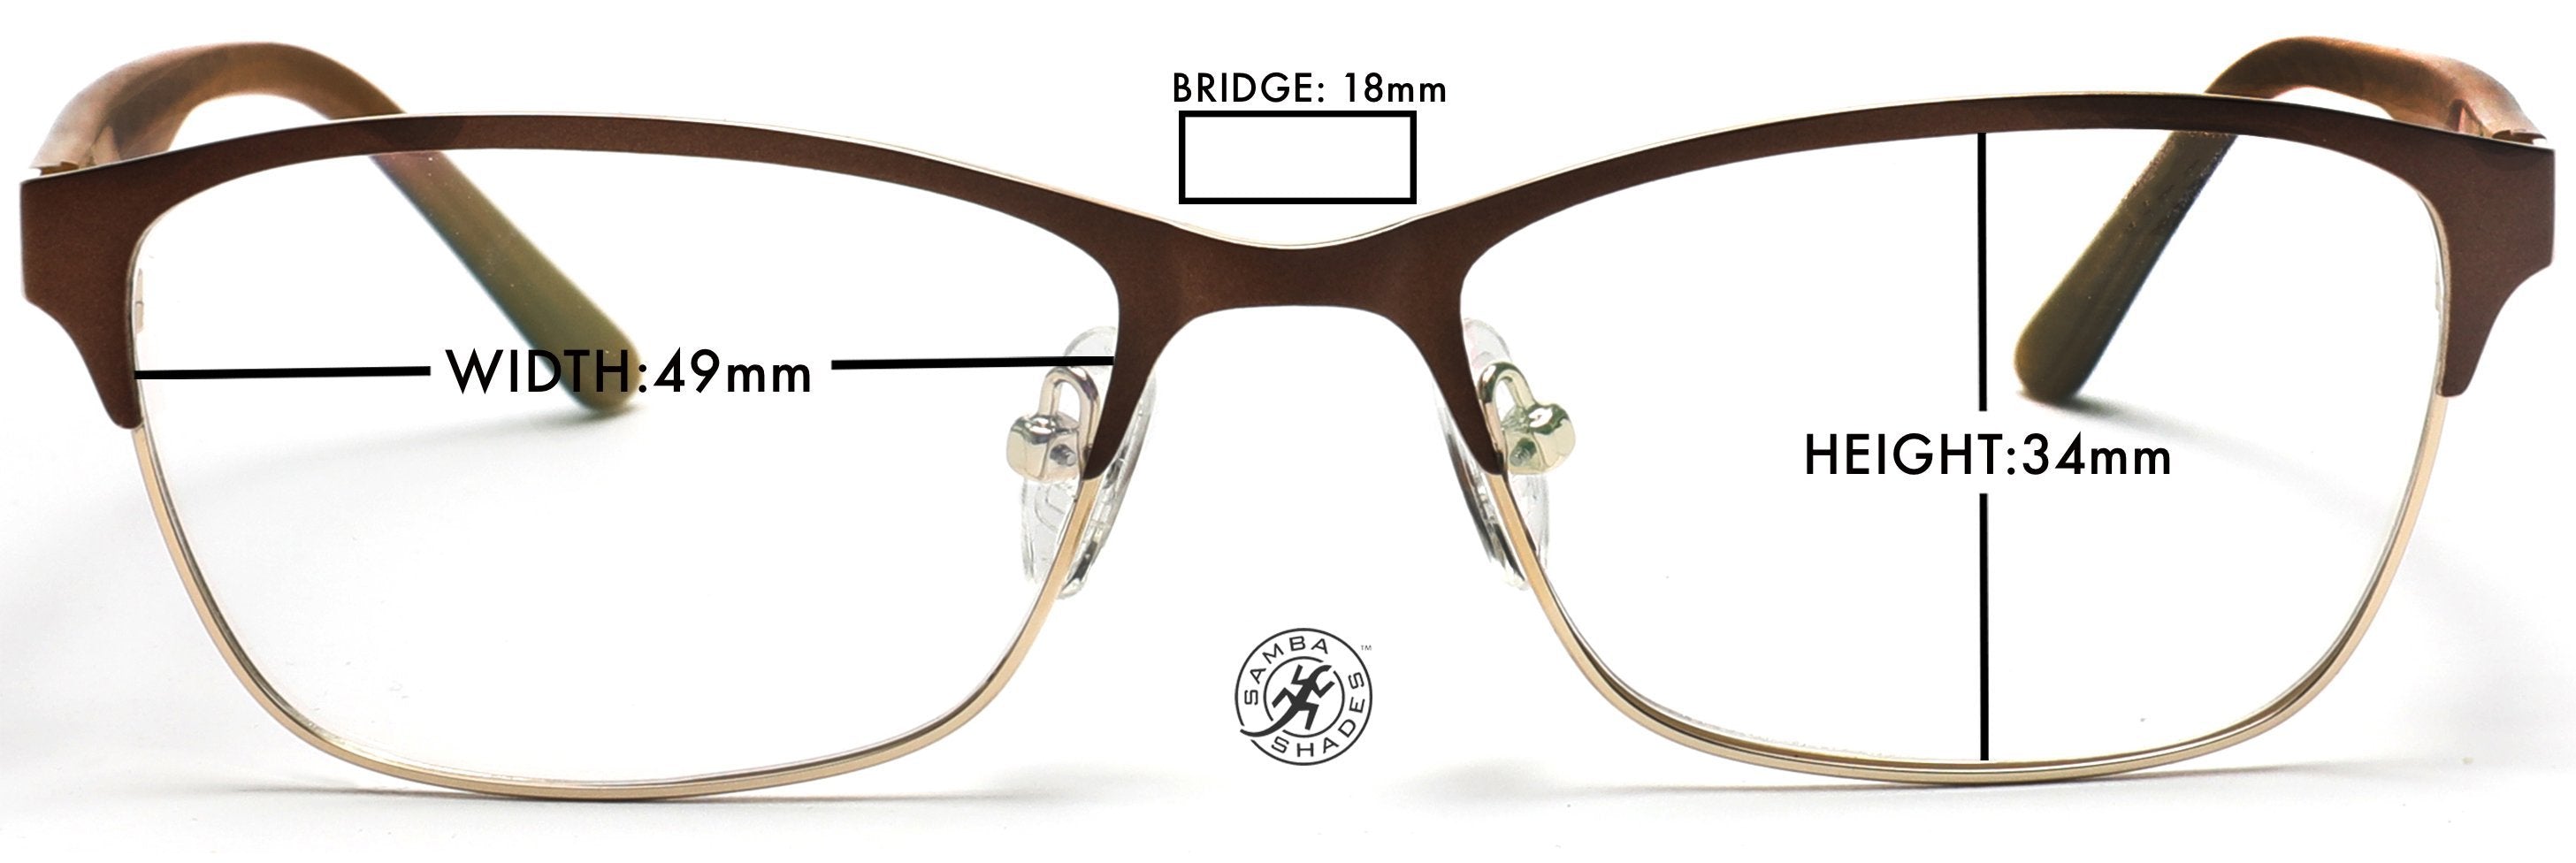 Tango Optics Browline Metal Eyeglasses Frame Luxe RX Stainless Steel Malcolm X Brown Gold For Prescription Lens-Samba Shades